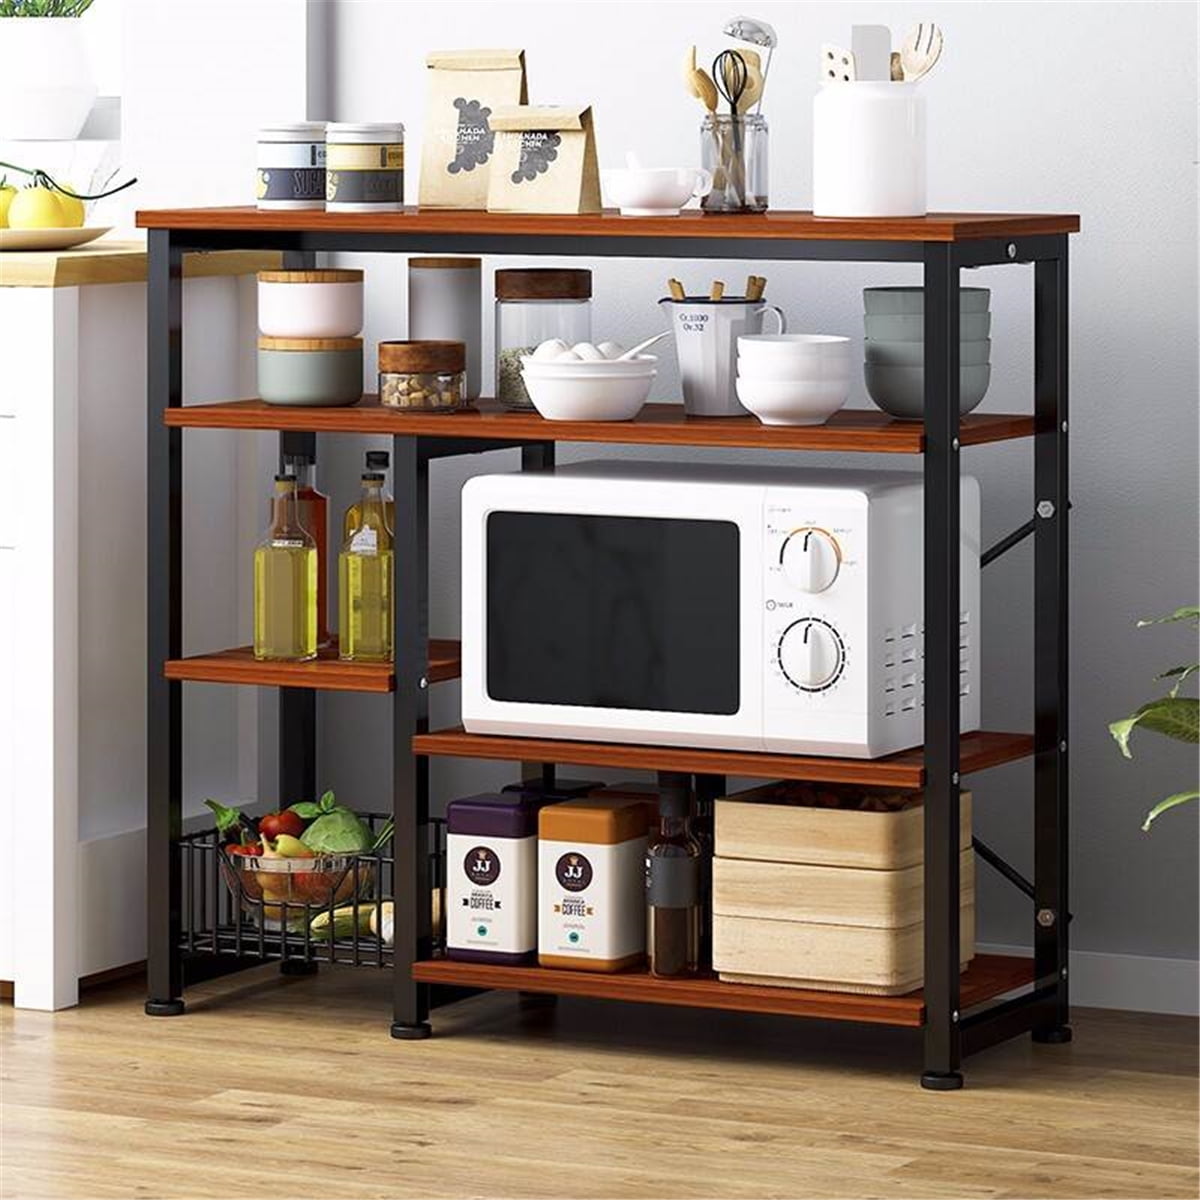 Tall Kitchen Baker's Rack, Industrial Microwave Oven Stand, Storage